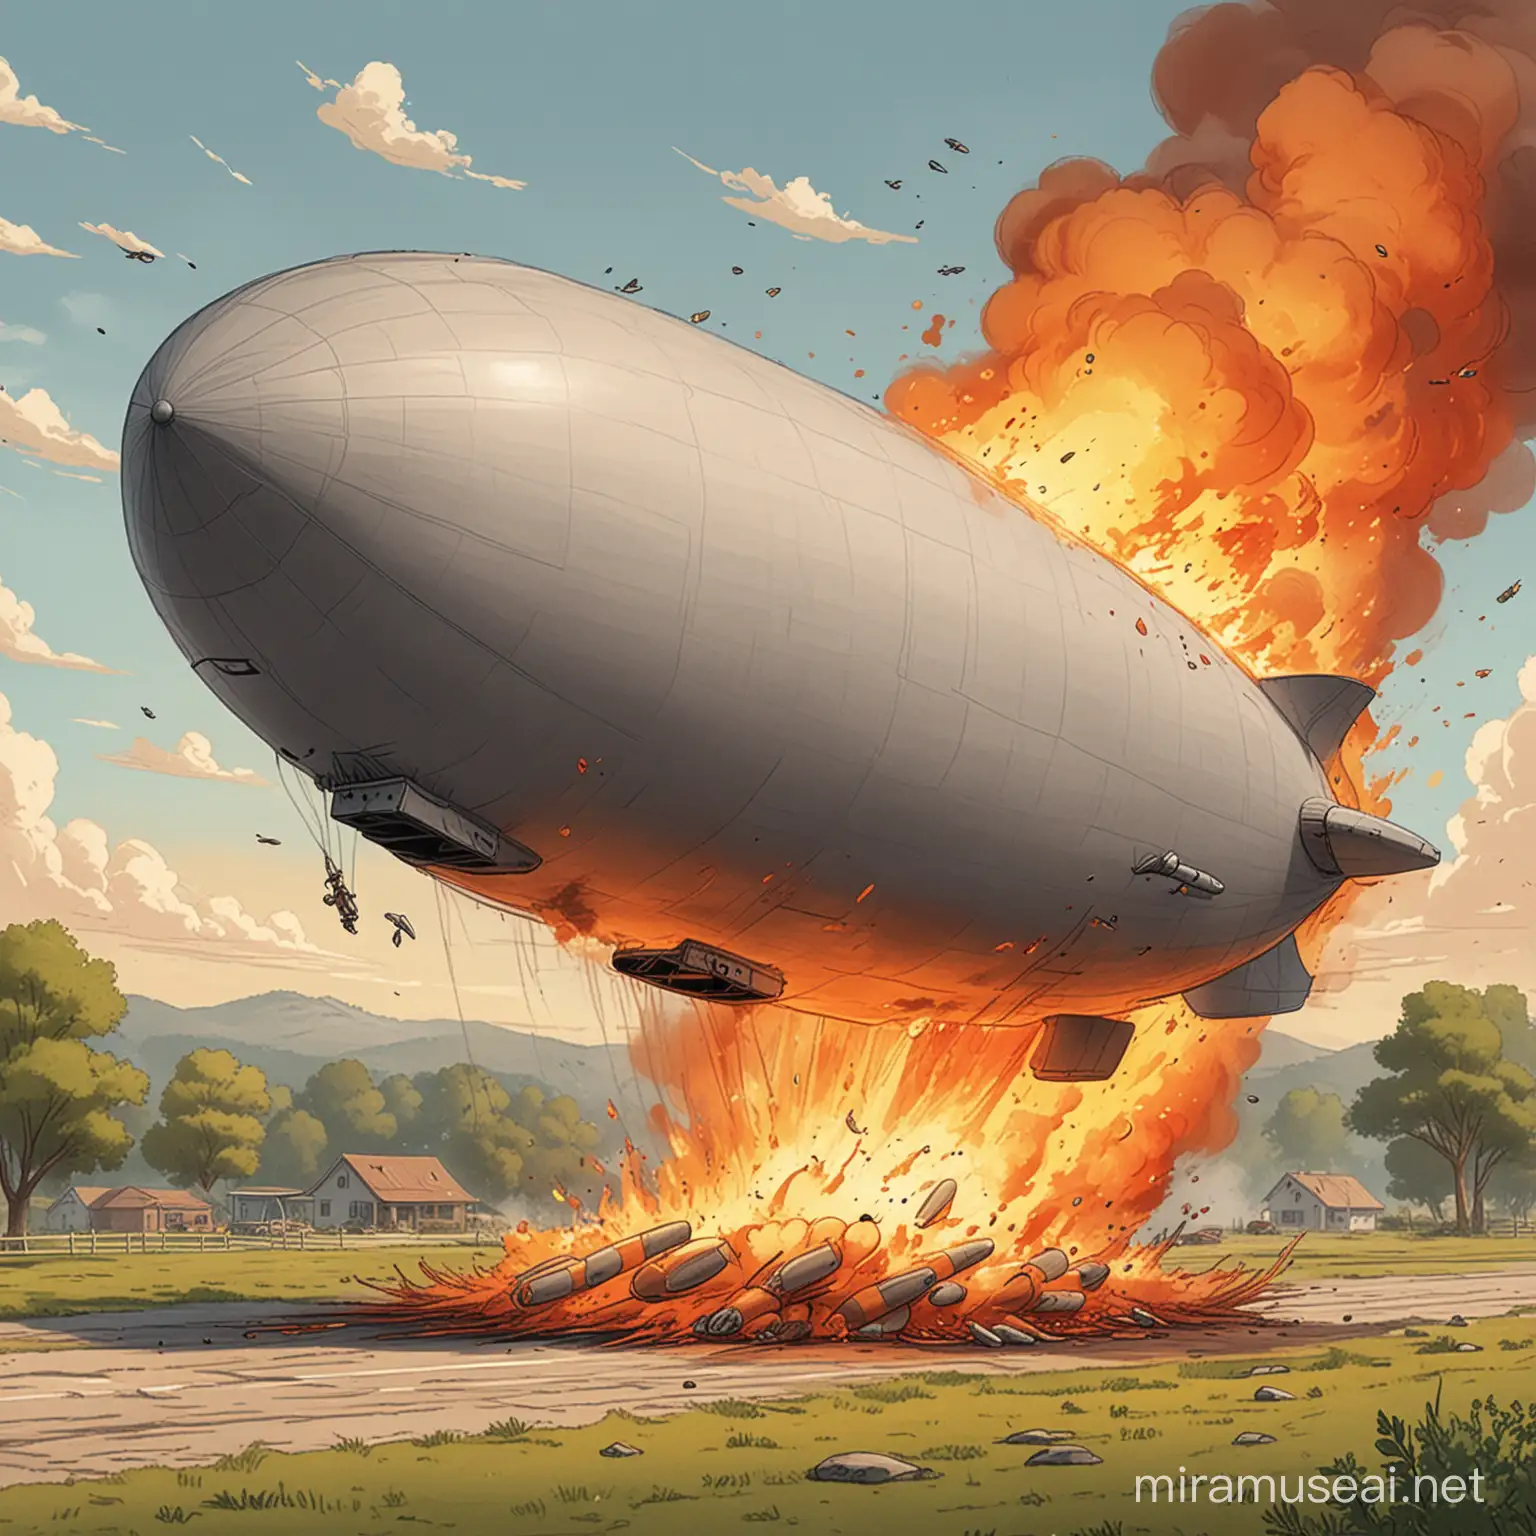 Draw a cartoon of an air blimp on fire crashing to the ground